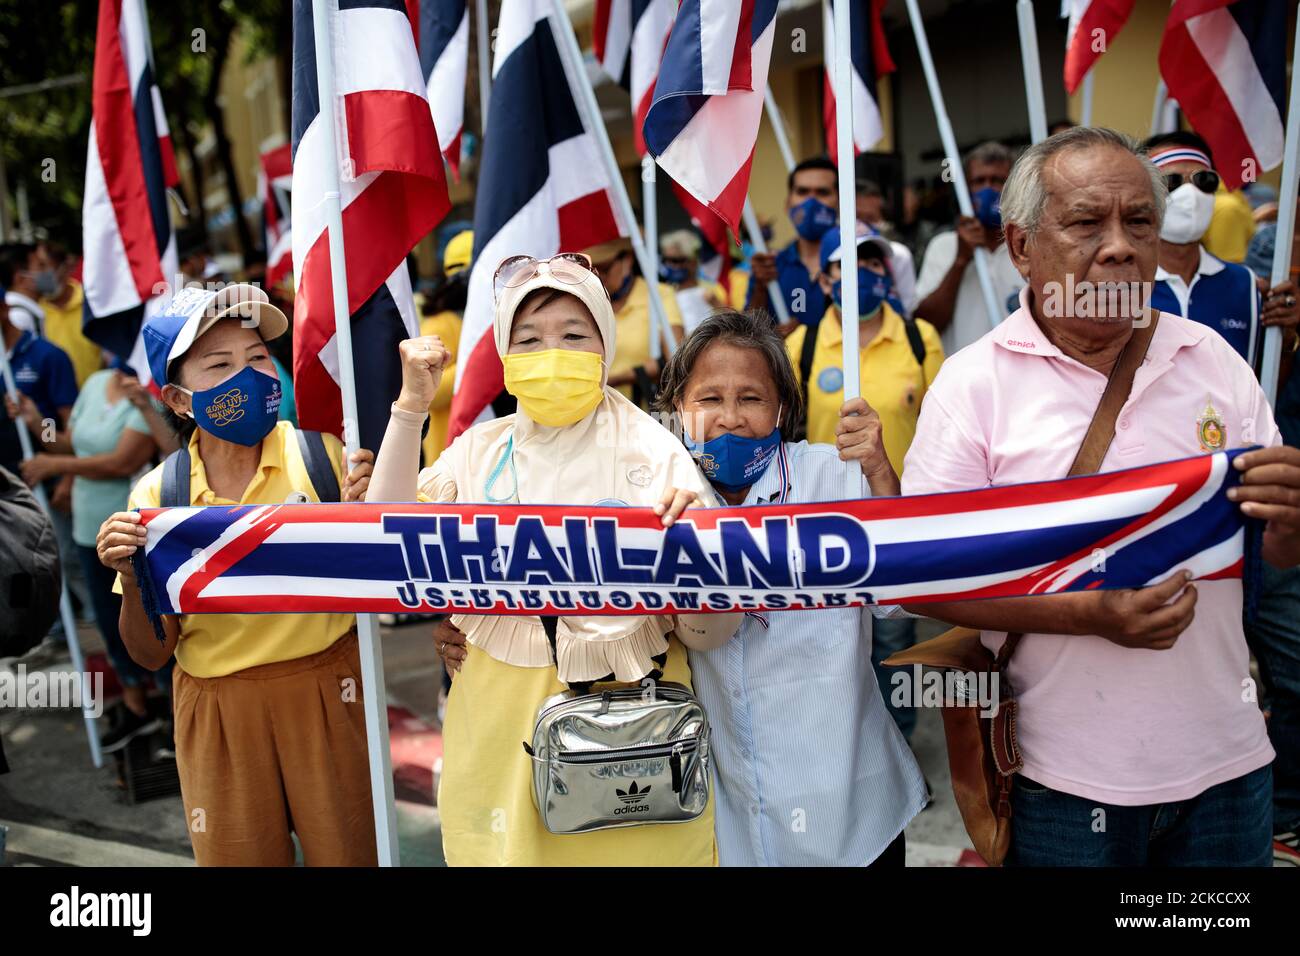 Monarchists stage a counter rally before thousands of other protesters attend a demonstration against the Government at Democracy Monument in Bangkok, Thailand on Sunday 16th, August 2020. Among the protesters' demands are calls for reform of Thailand's monarchy. (Photo - Jack Taylor) Stock Photo